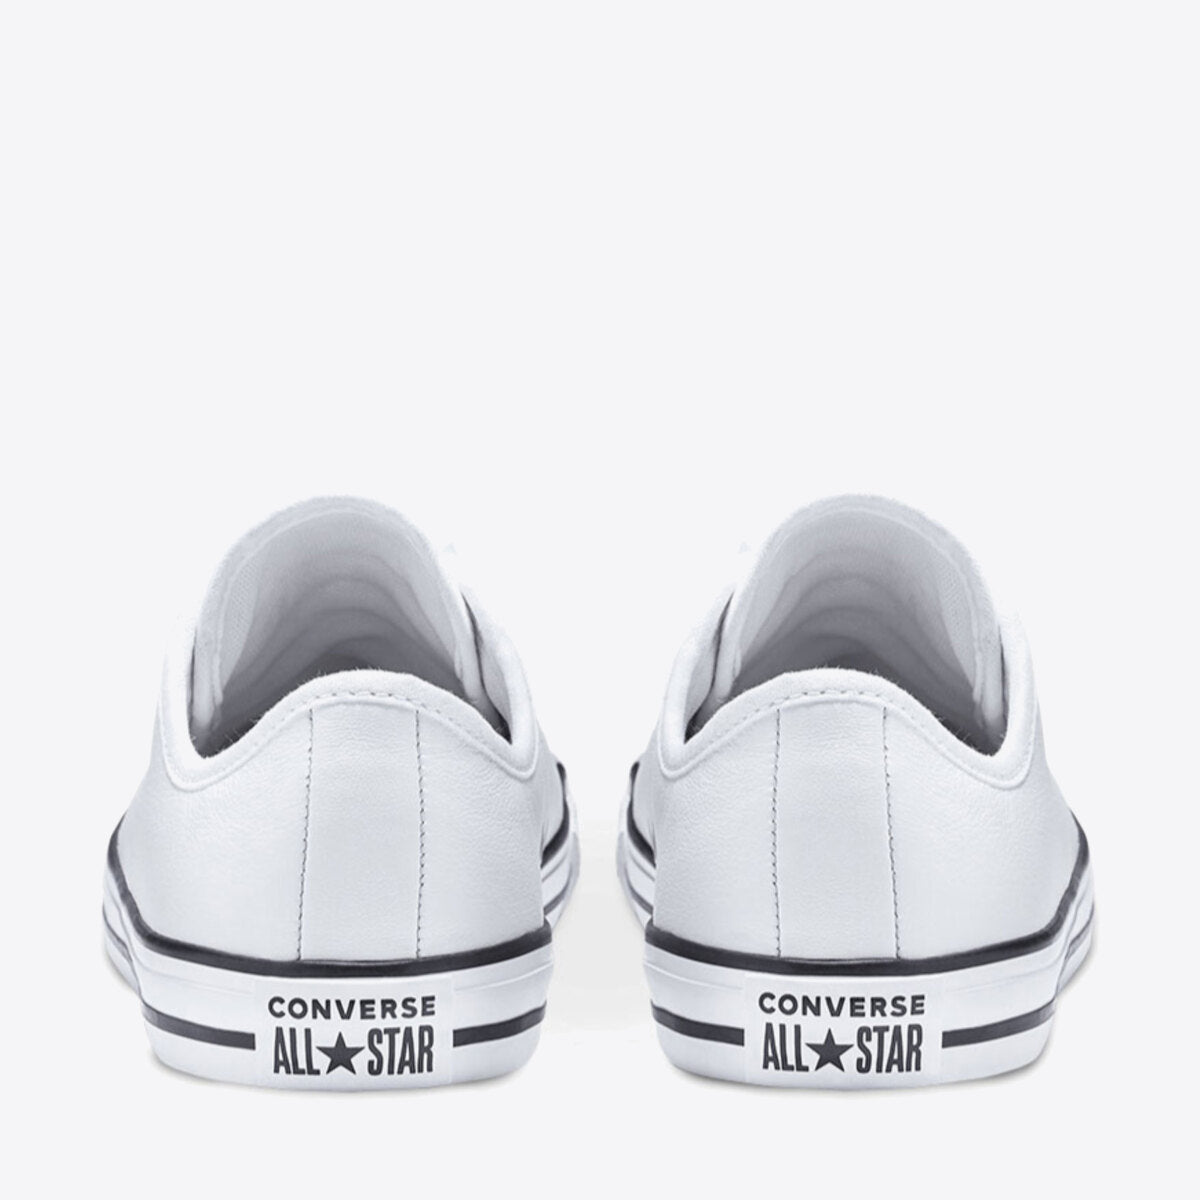 CONVERSE Dainty 2.0 Leather Low White - Image 6